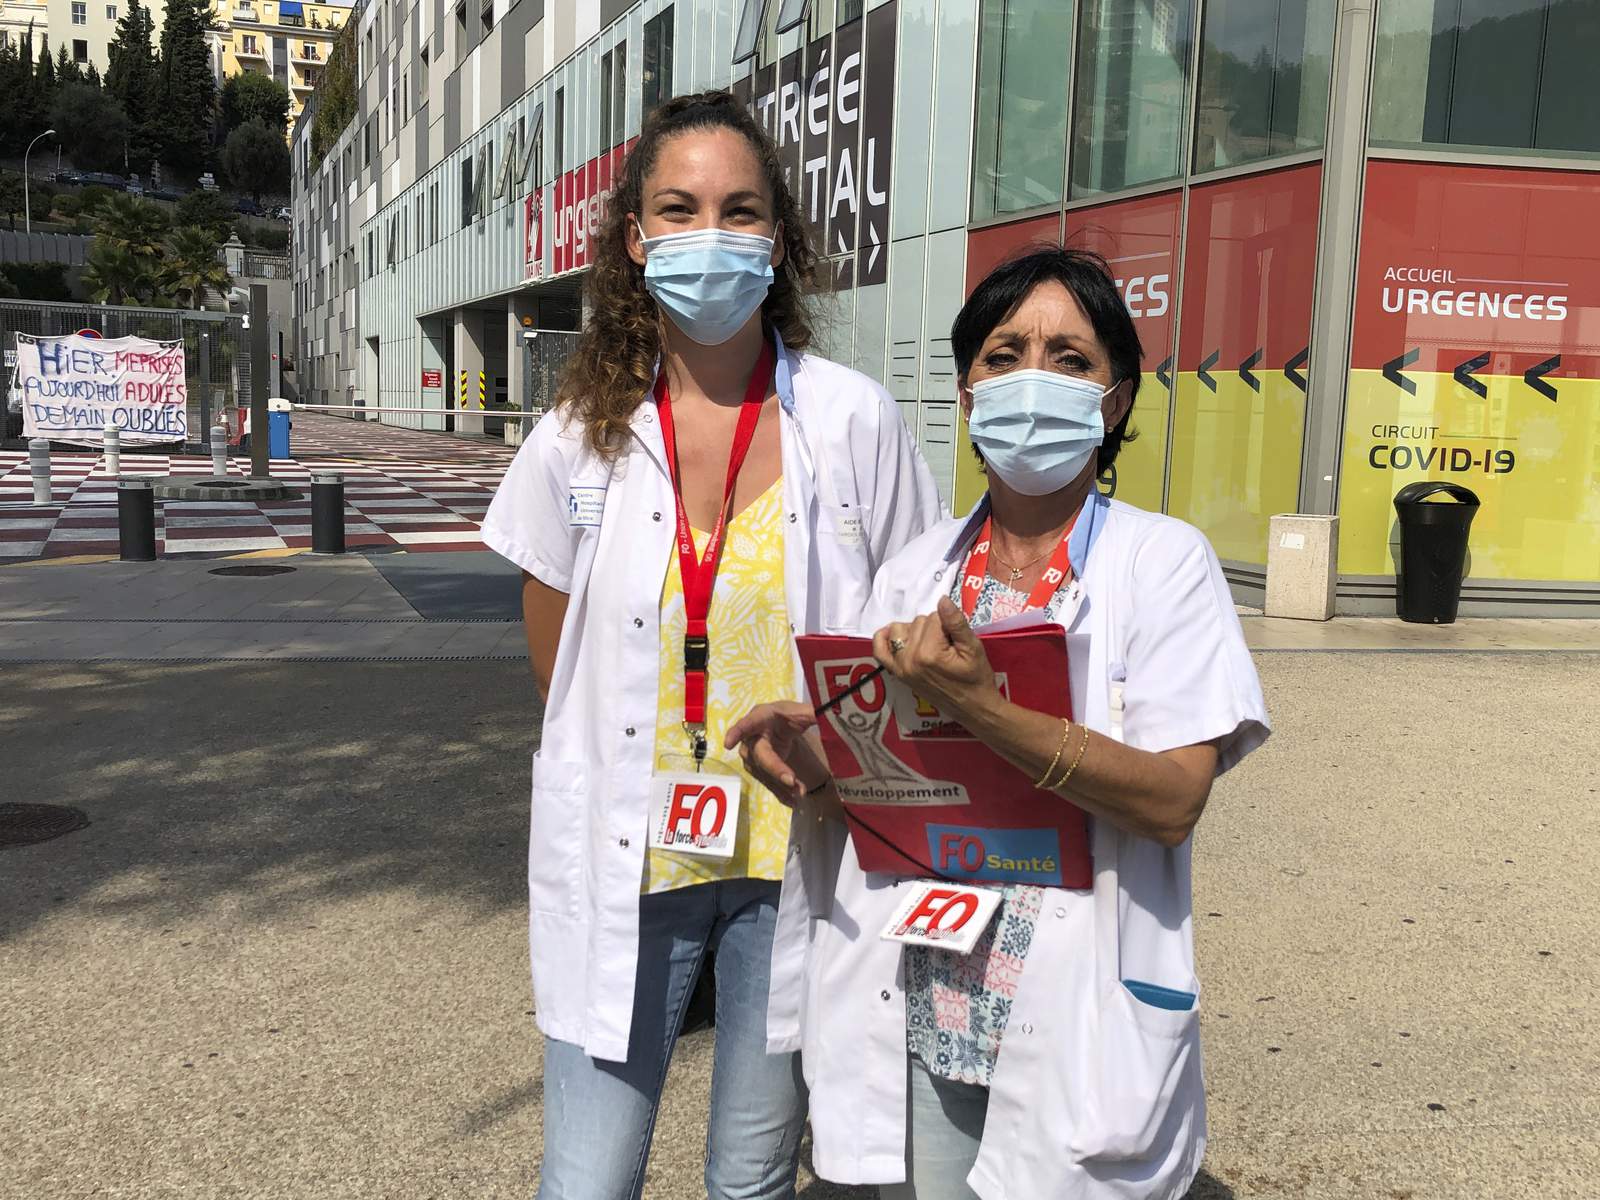 For health workers, the pandemic Tour de France is a big ask